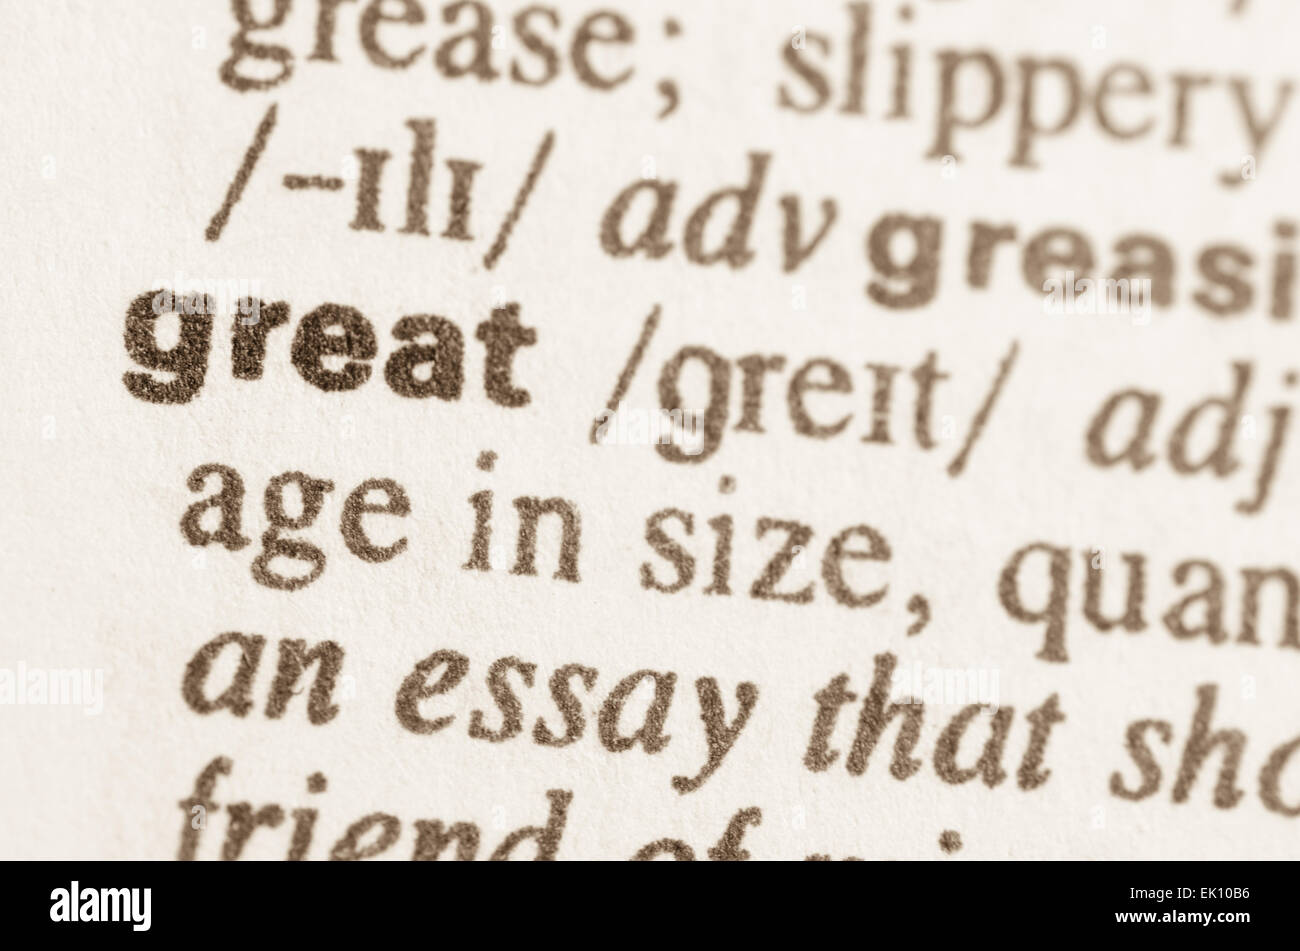 Definition of word great in dictionary Stock Photo